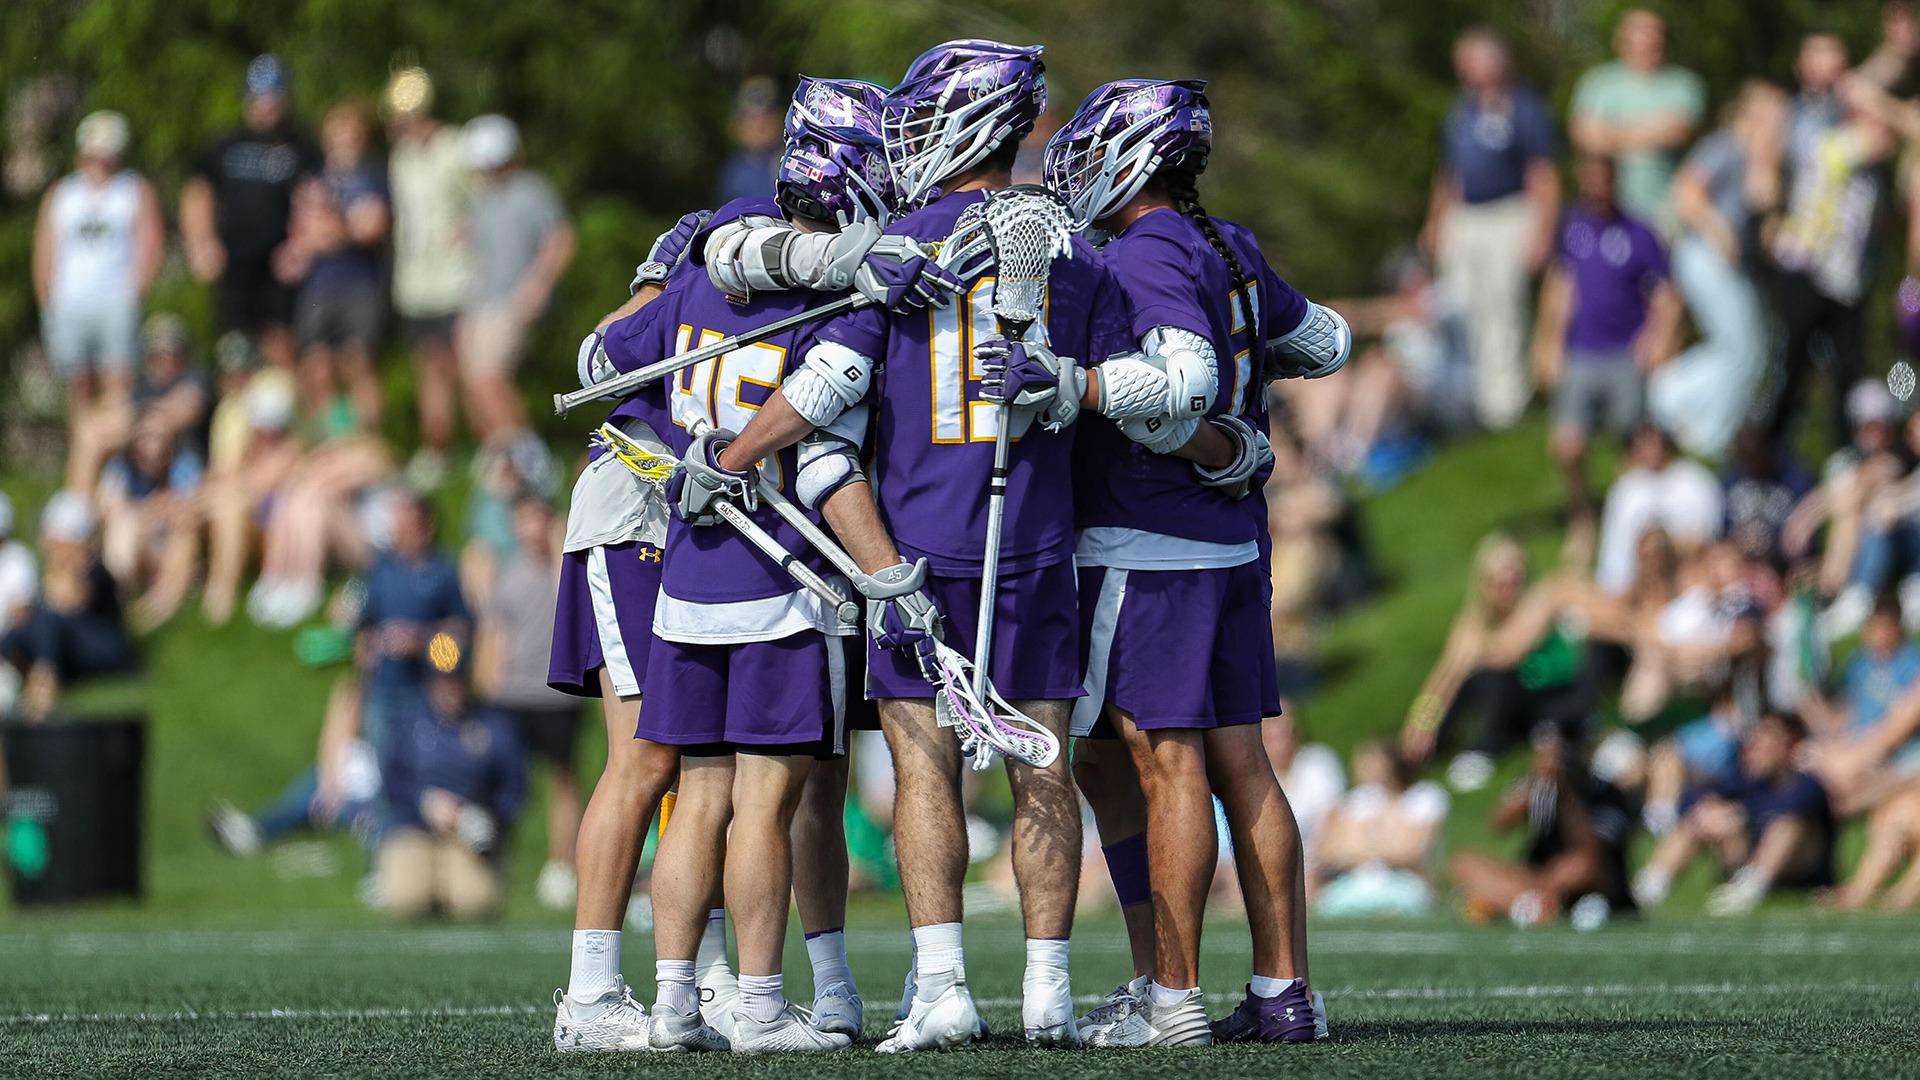 UAlbany' men's lacrosse gave Notre Dame all it could handle on Sunday but ultimately fell, 14-9 in the First Round of the NCAA Tournament.